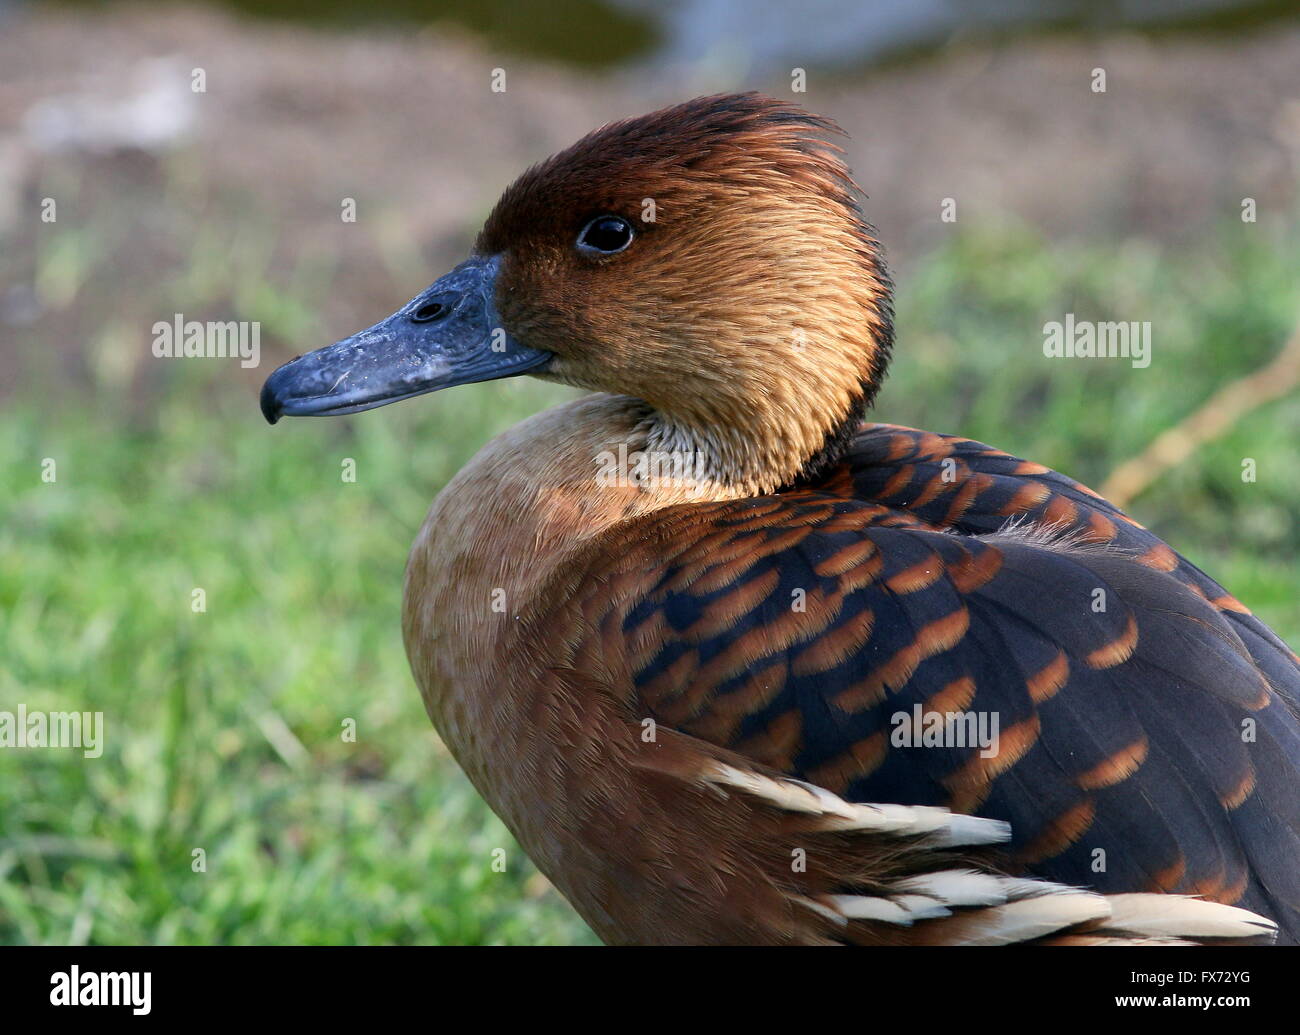 Mature Fulvous whistling duck (Dendrocygna bicolor) mugshot - Native to Tropical South America, Caribbean, East Africa and India Stock Photo